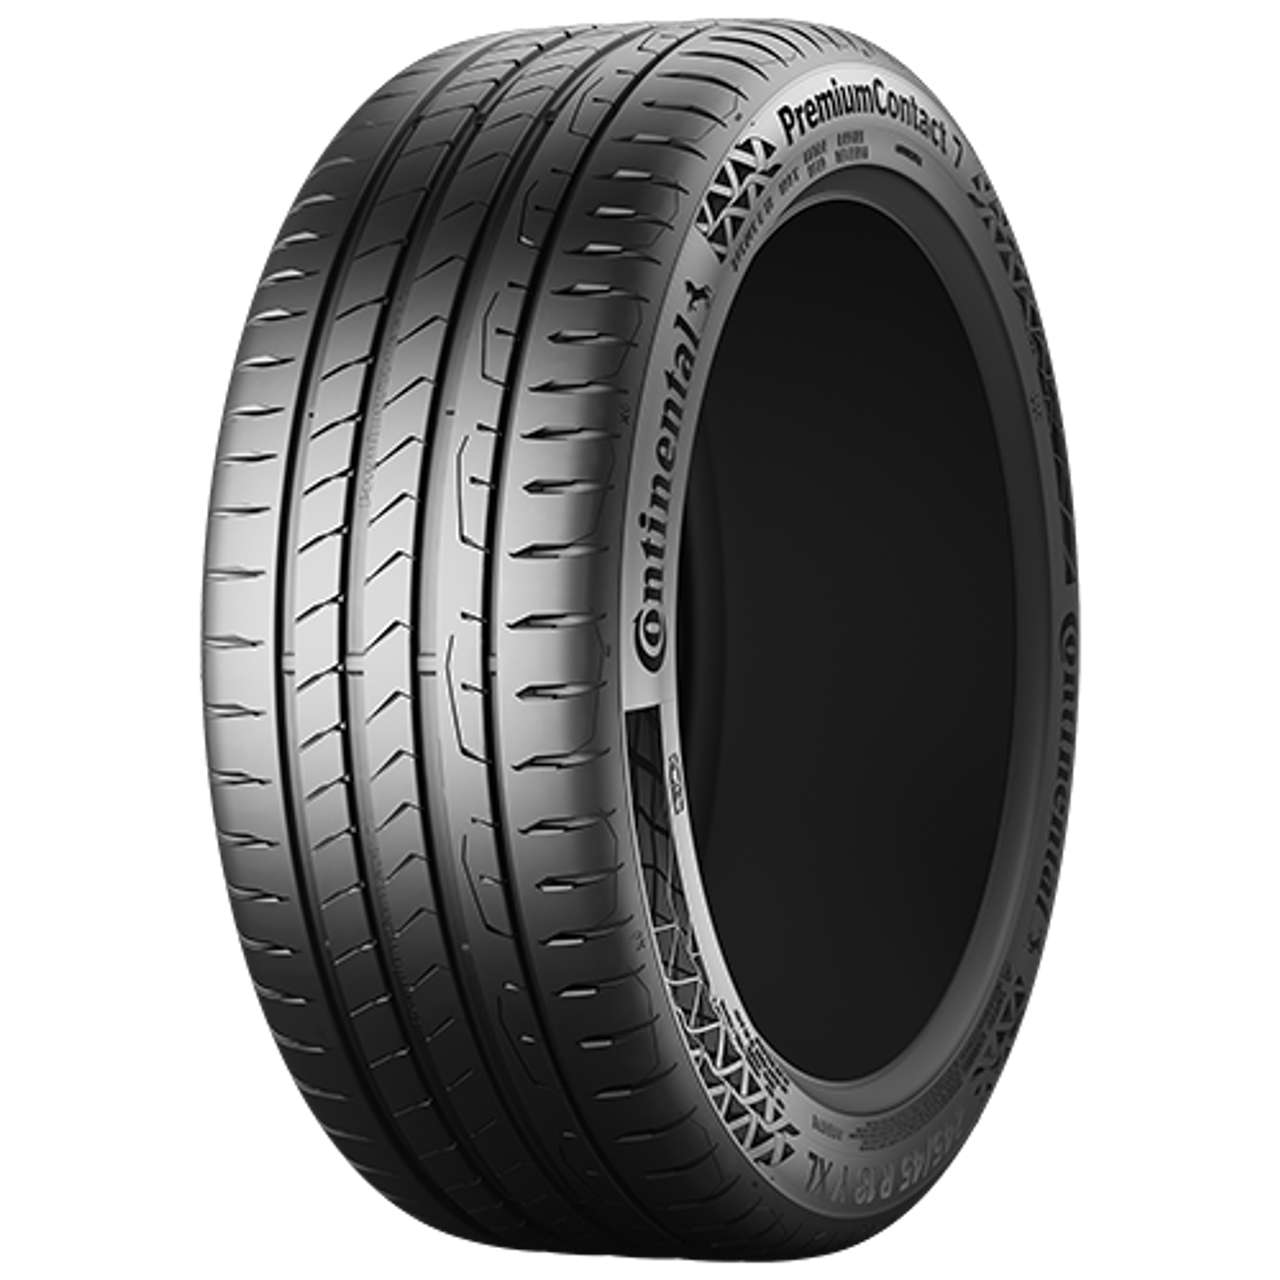 CONTINENTAL PREMIUMCONTACT 7 (EVc) 205/55R16 91V BSW